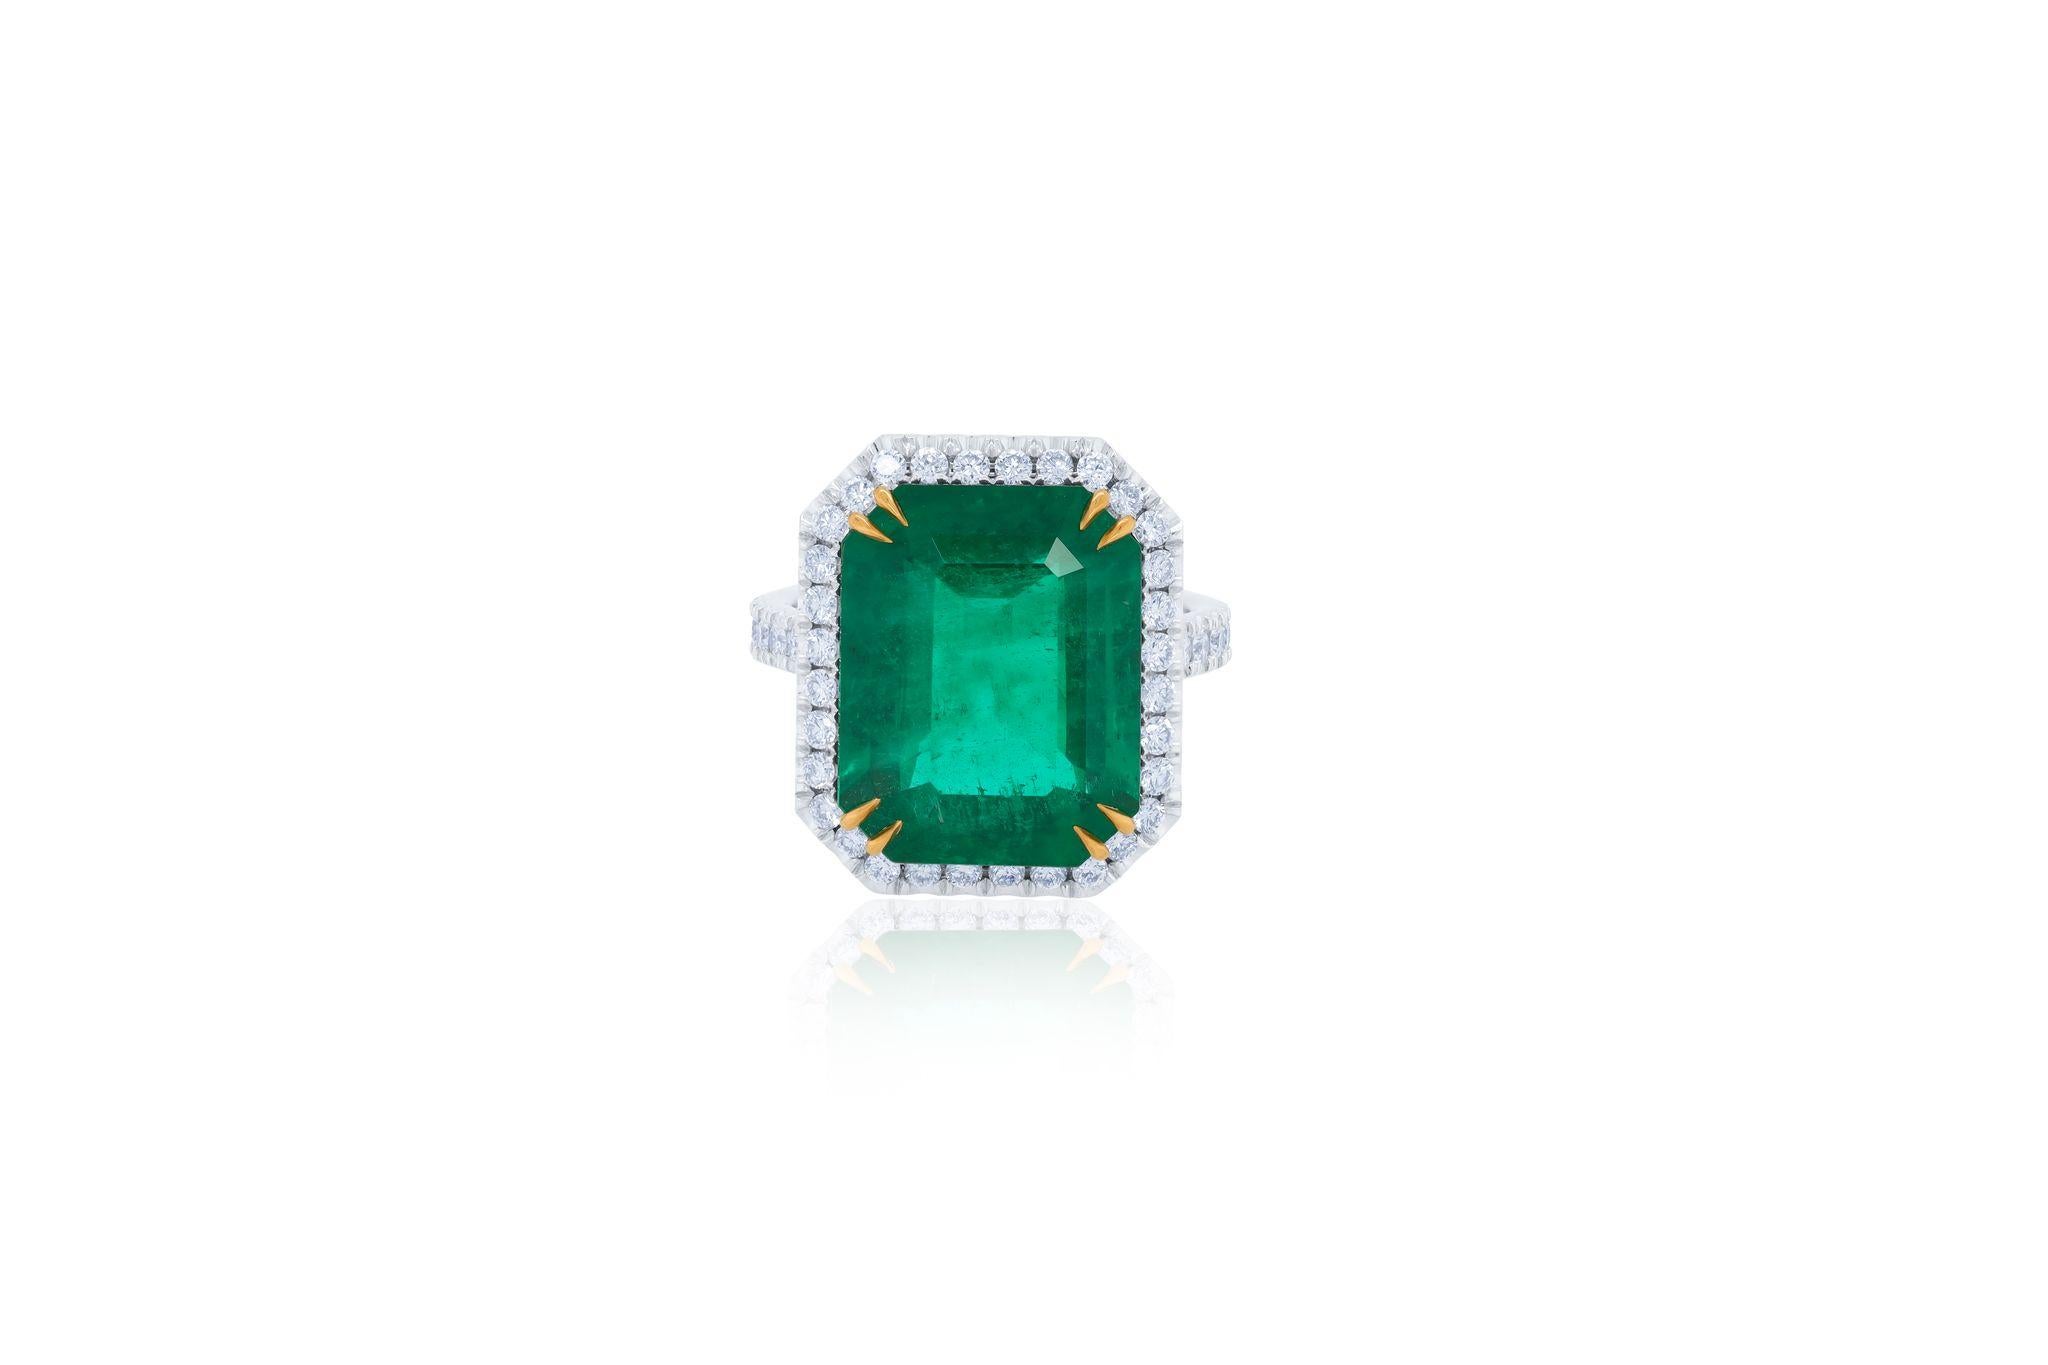 Platinum and 18 kt yellow gold emerald diamond ring featuring a 9.11 ct green emerald with 1.50 cts tw of micropave round diamonds around in a halo setting.
Diana M. is a leading supplier of top-quality fine jewelry for over 35 years.
Diana M is